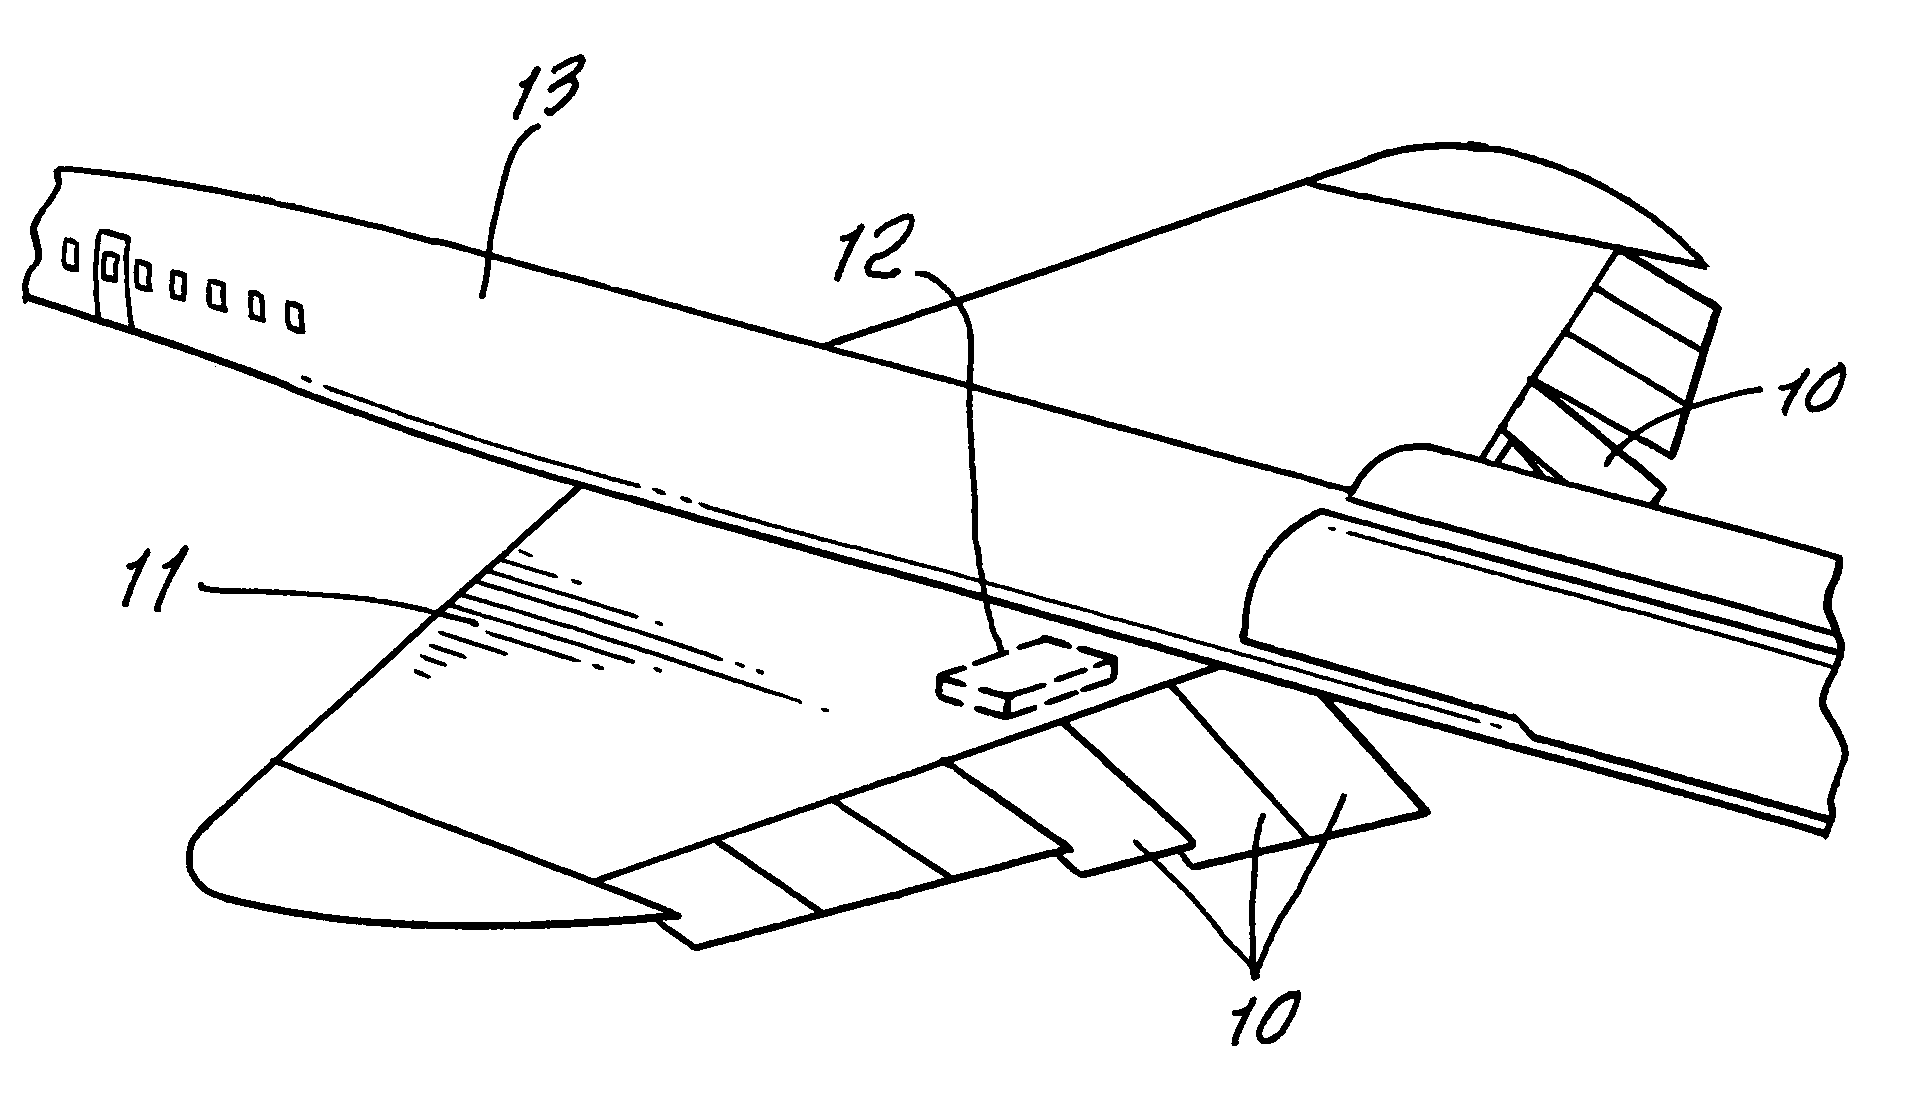 Lift and twist control using trailing edge control surfaces on supersonic laminar flow wings